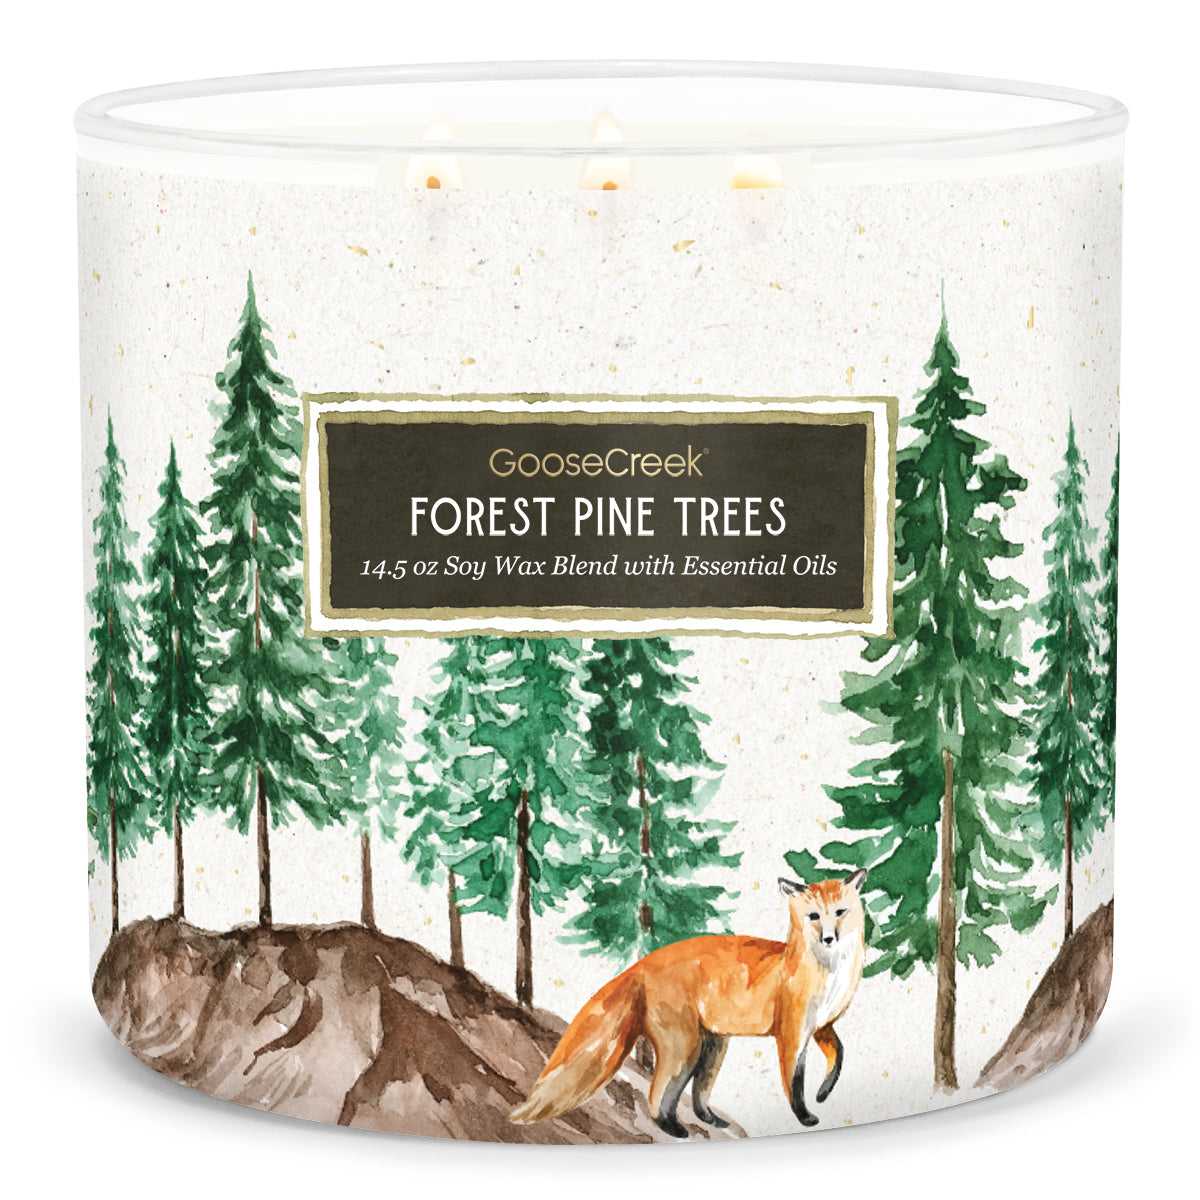 Forest Pine Trees Large 3-Wick Candle